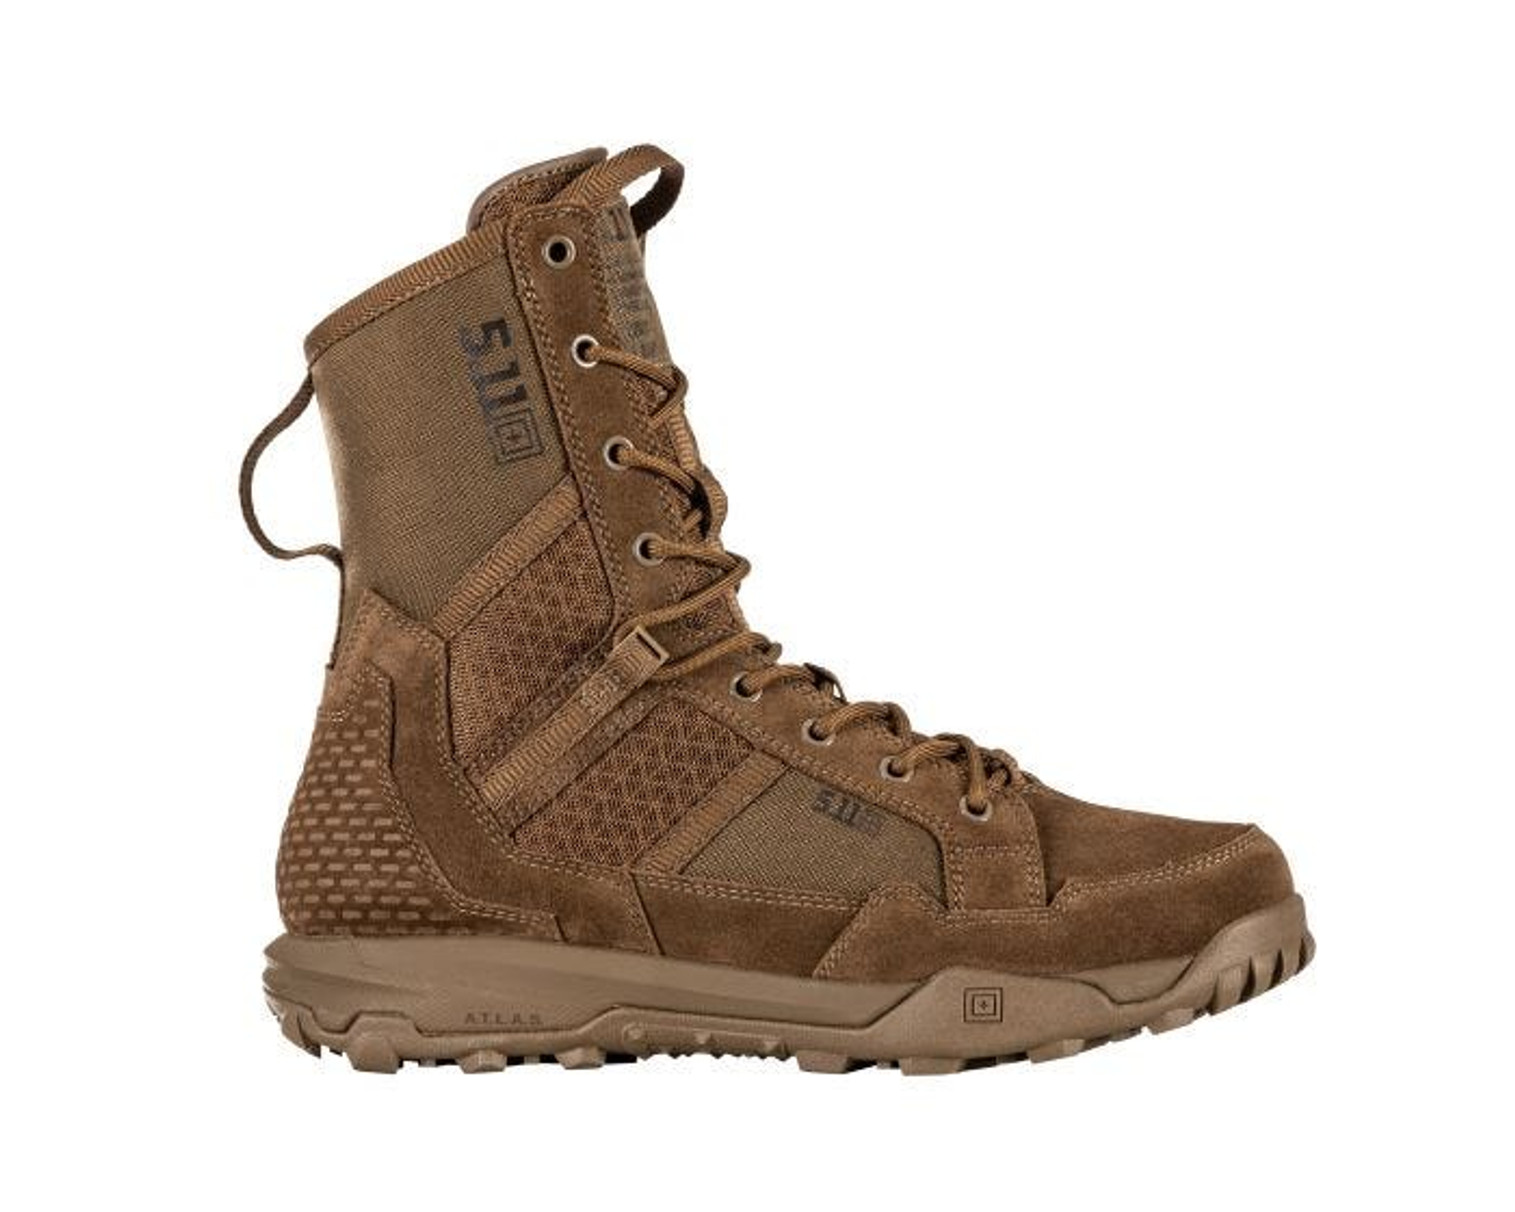 5.11 A.t.l.a.s. 8 Boot - KR5-1242210612R